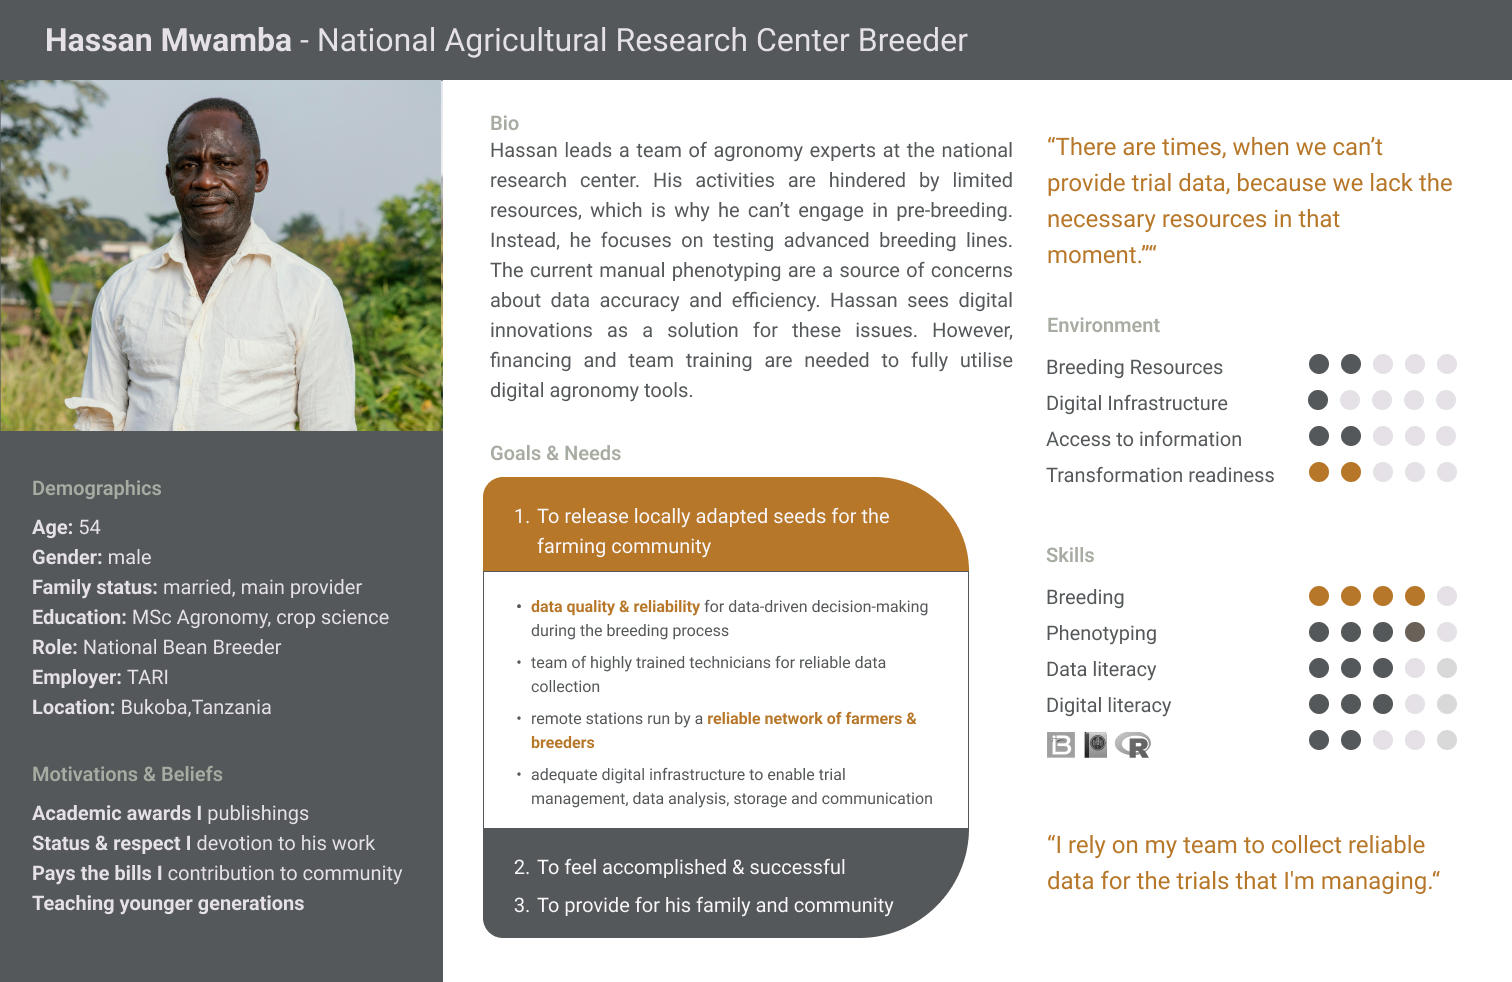 User profiles - Putting a person behind plant phenotyping  - Hassan Profile - Alliance Bioversity International - CIAT